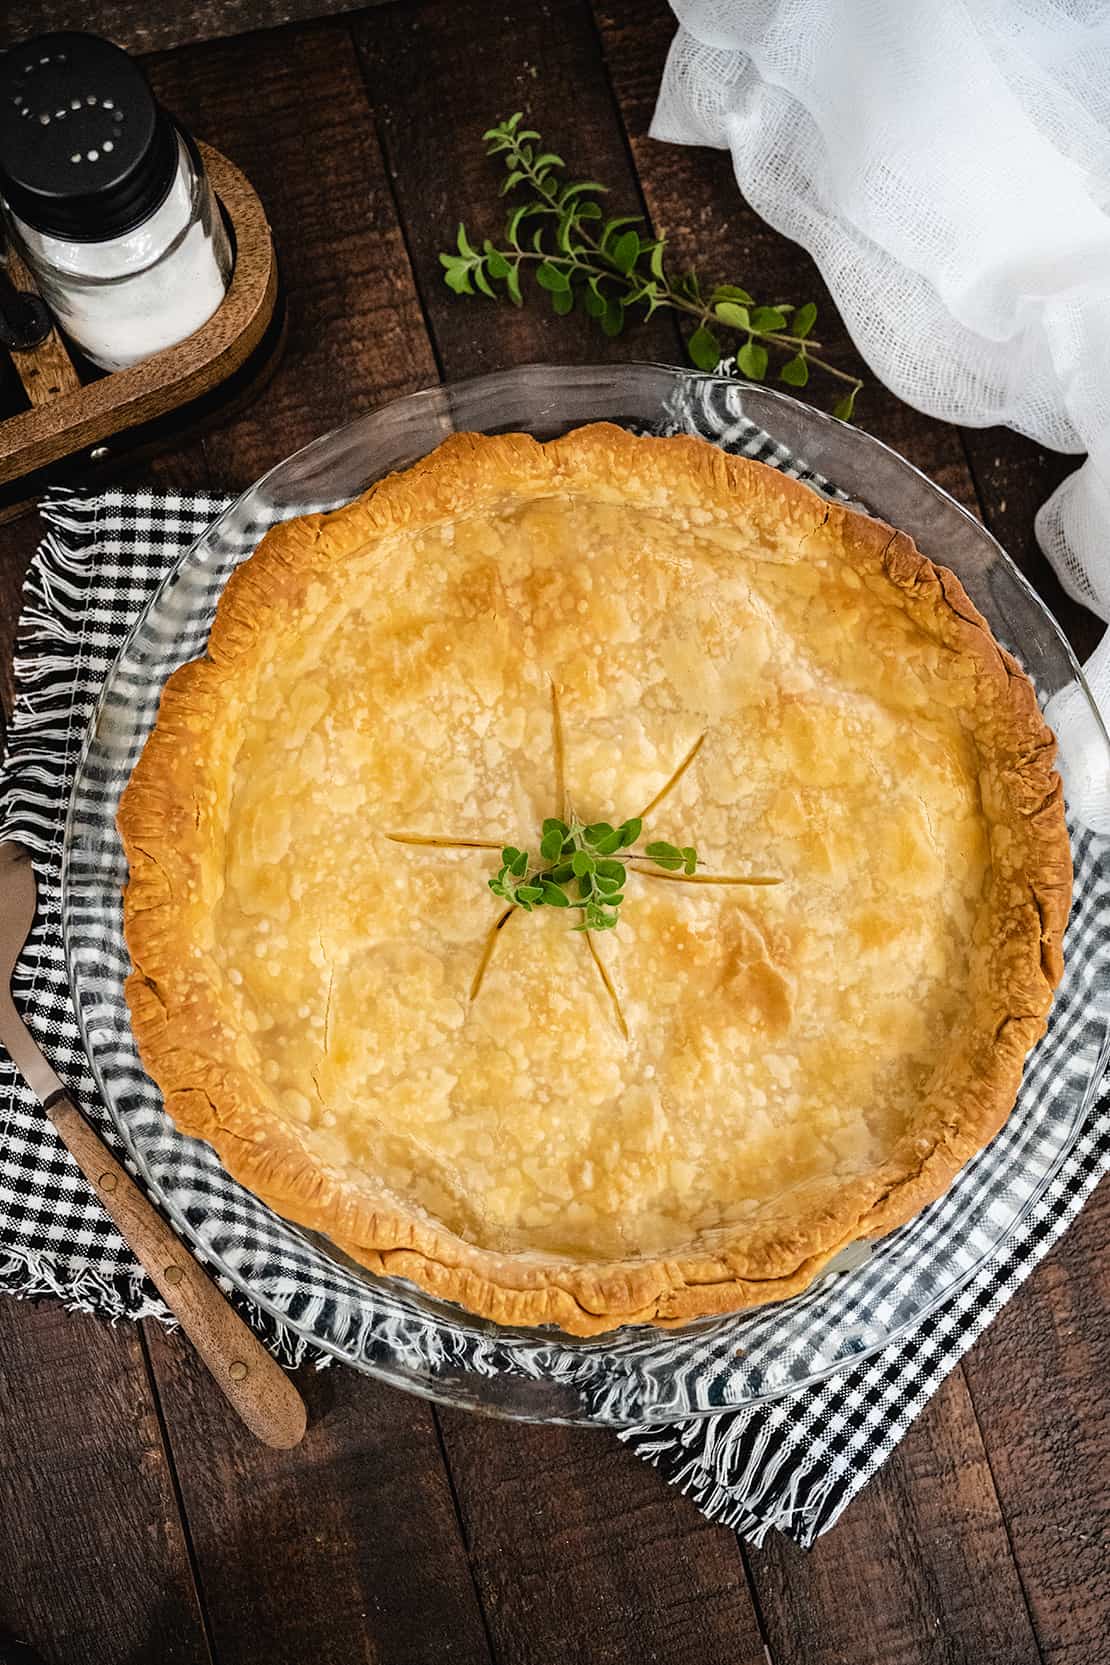 Overhead image of a whole chicken pot pie garnished with fresh thyme set on a wooden tablescape with a black and white checked placemat.